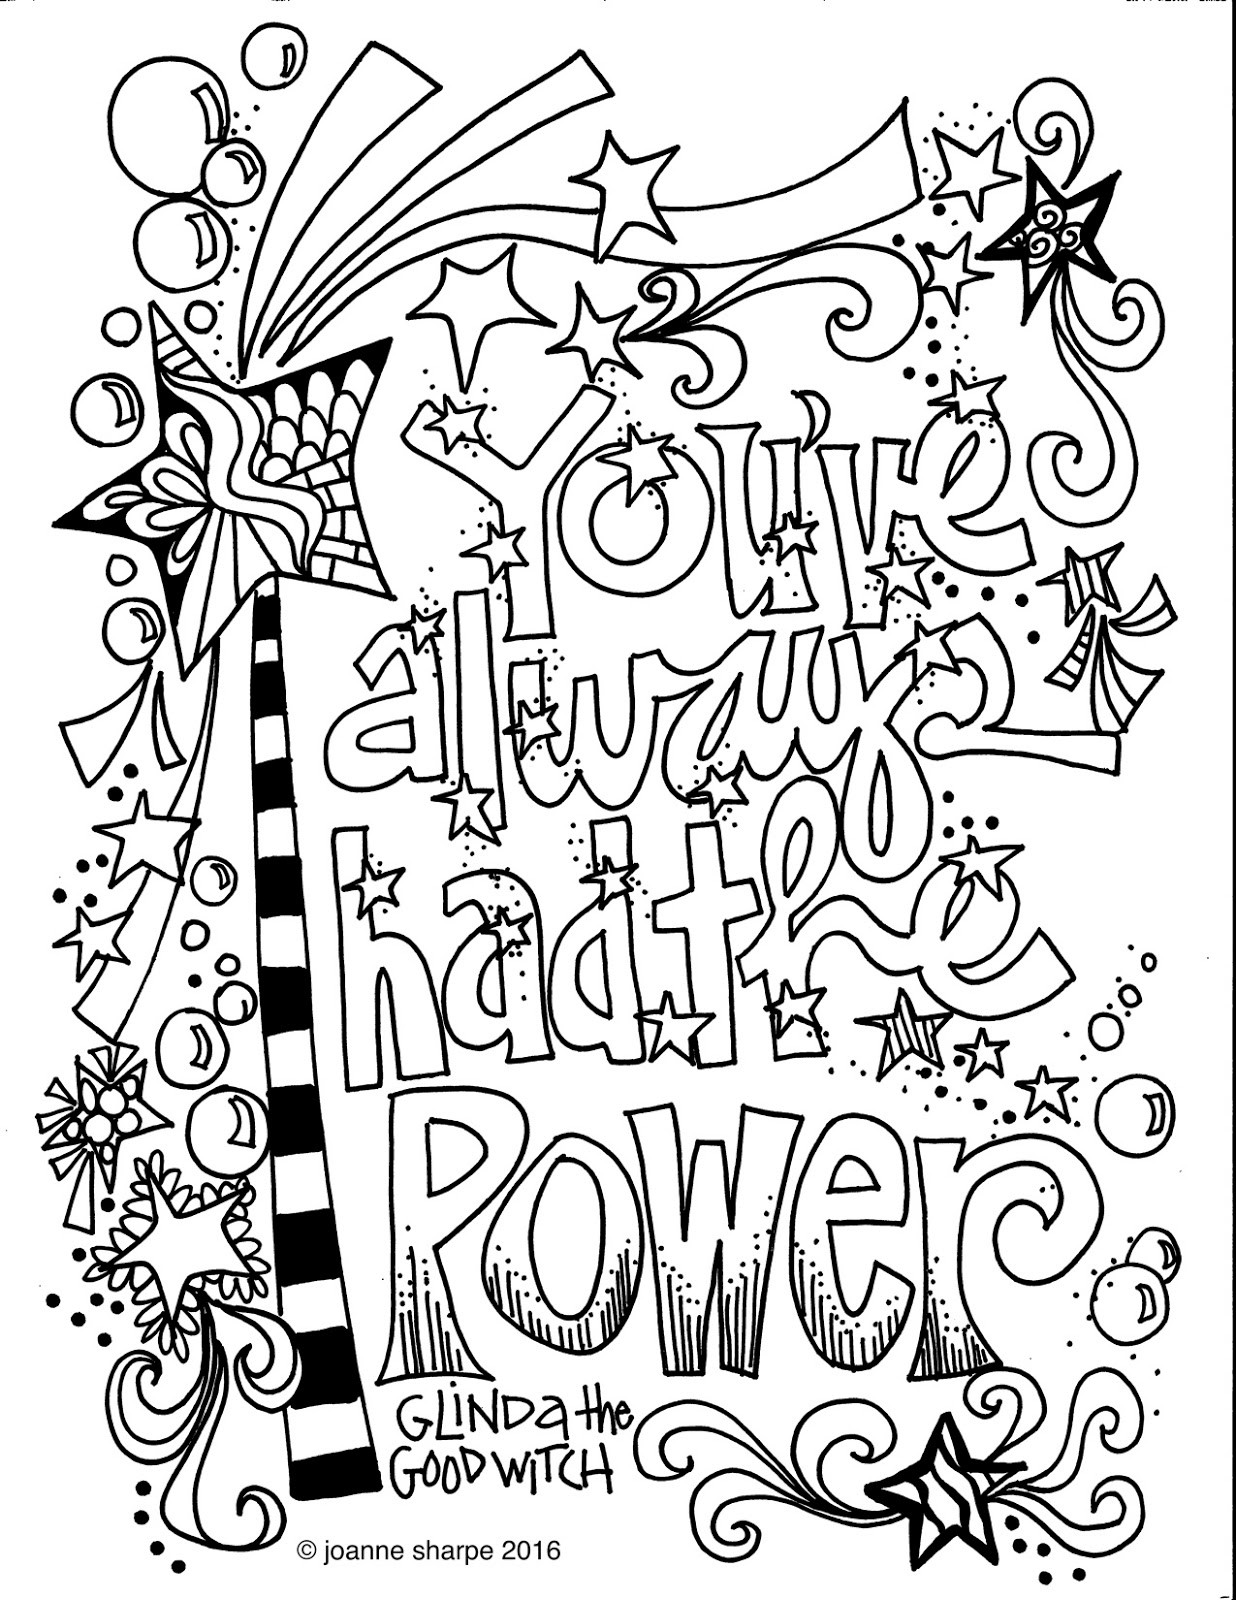 Quote Coloring Pages For Adults
 Whimspirations WHIMSICAL WEDNESDAY "Color Power"